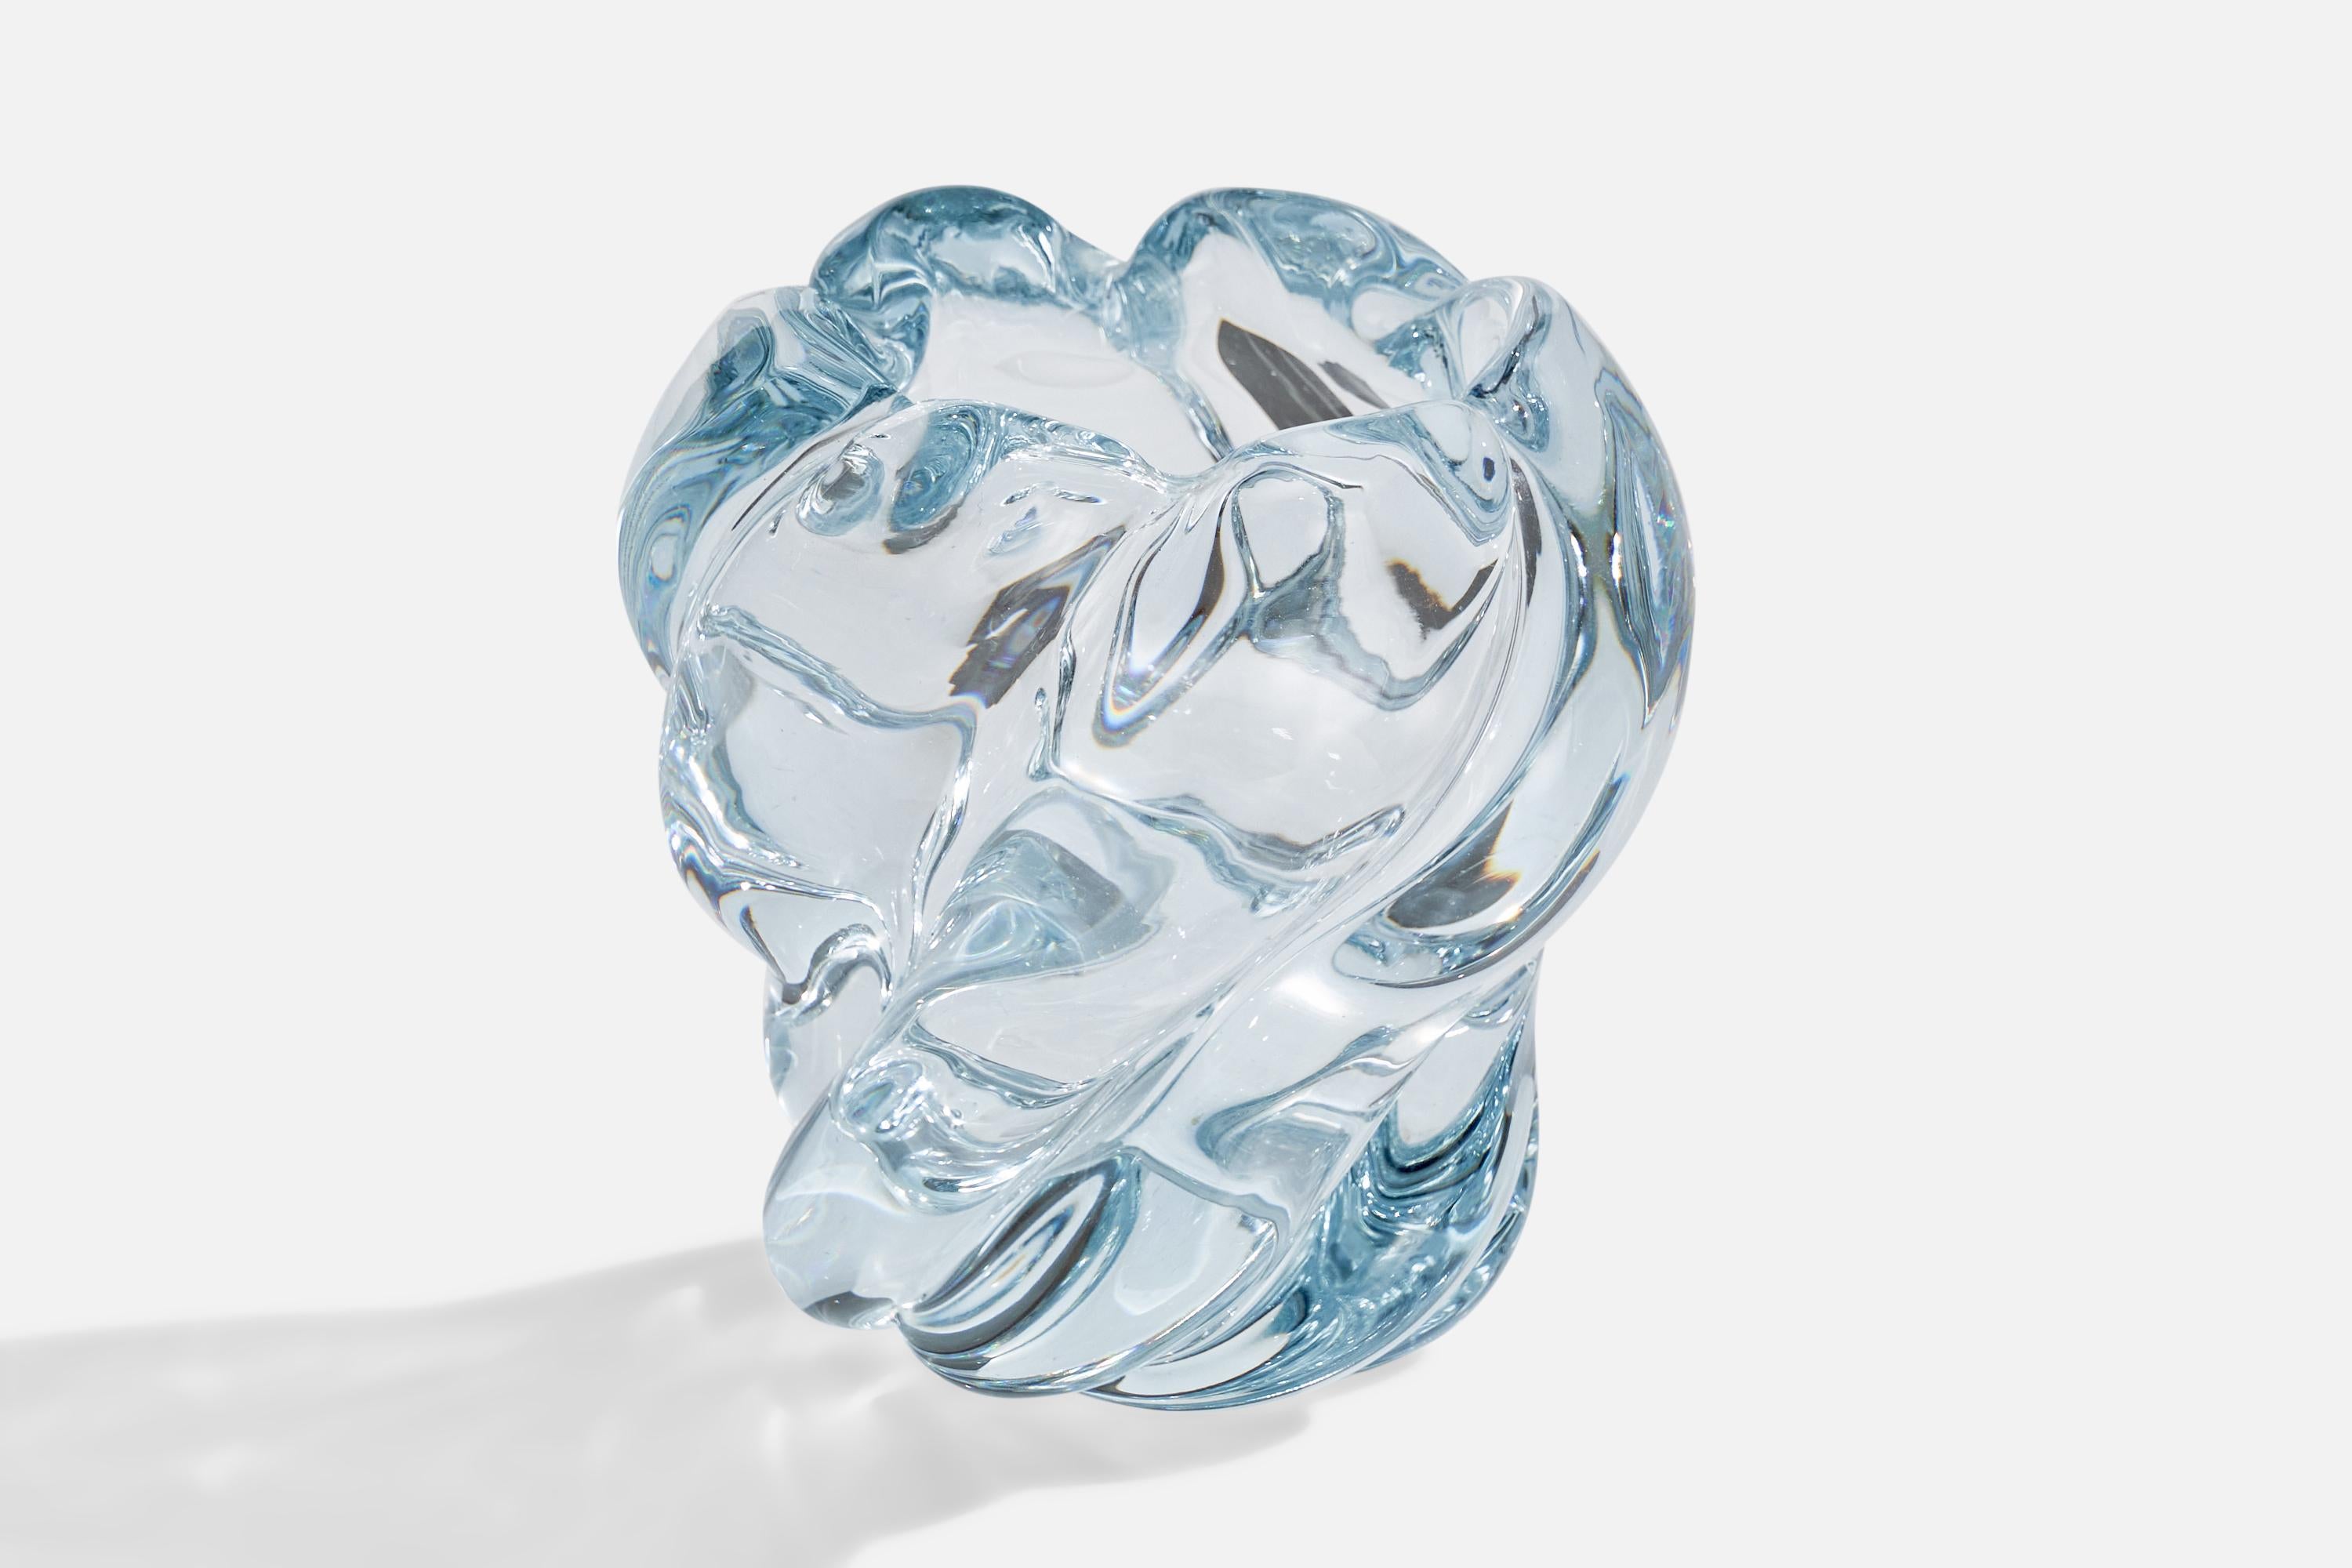 A blue blown-glass vase designed by Edvin Öhrström and produced by Orrefors, Sweden, c. 1940s.